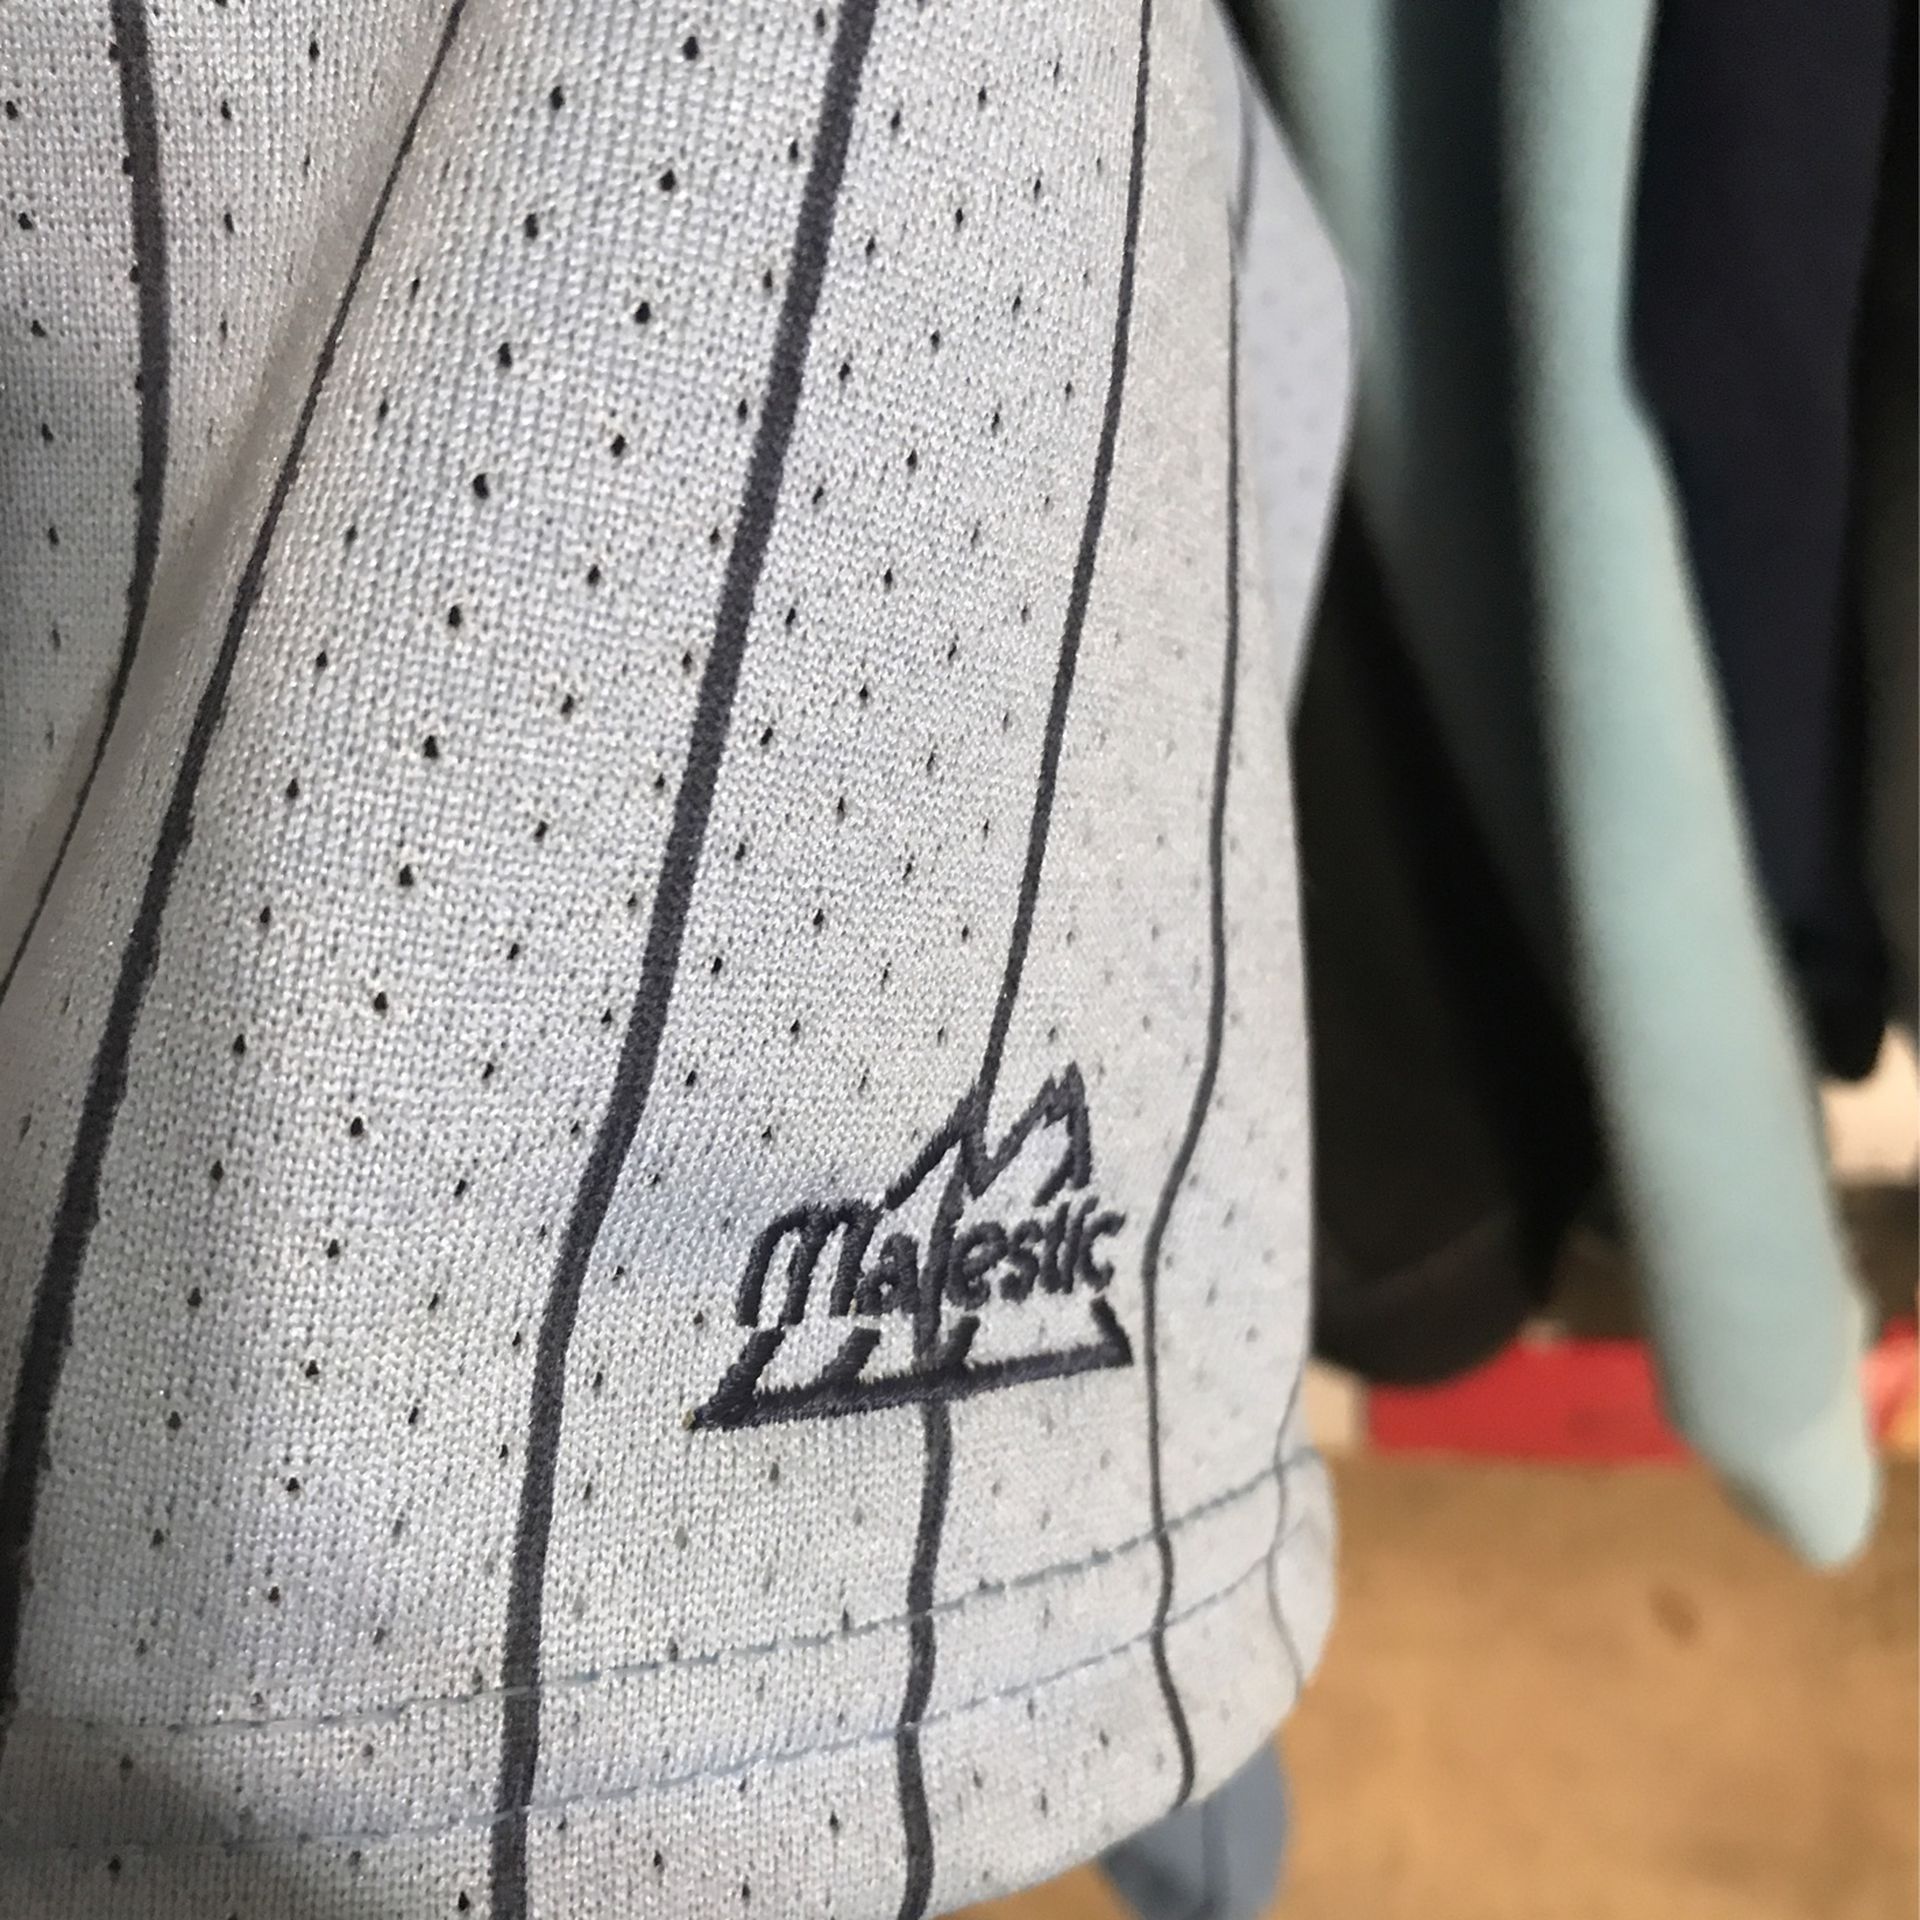 VINTAGE ATLANTA BRAVES BABY BLUE BASEBALL JERSEY MAJESTIC 90'S SZ LARGE  RARE for Sale in West Covina, CA - OfferUp